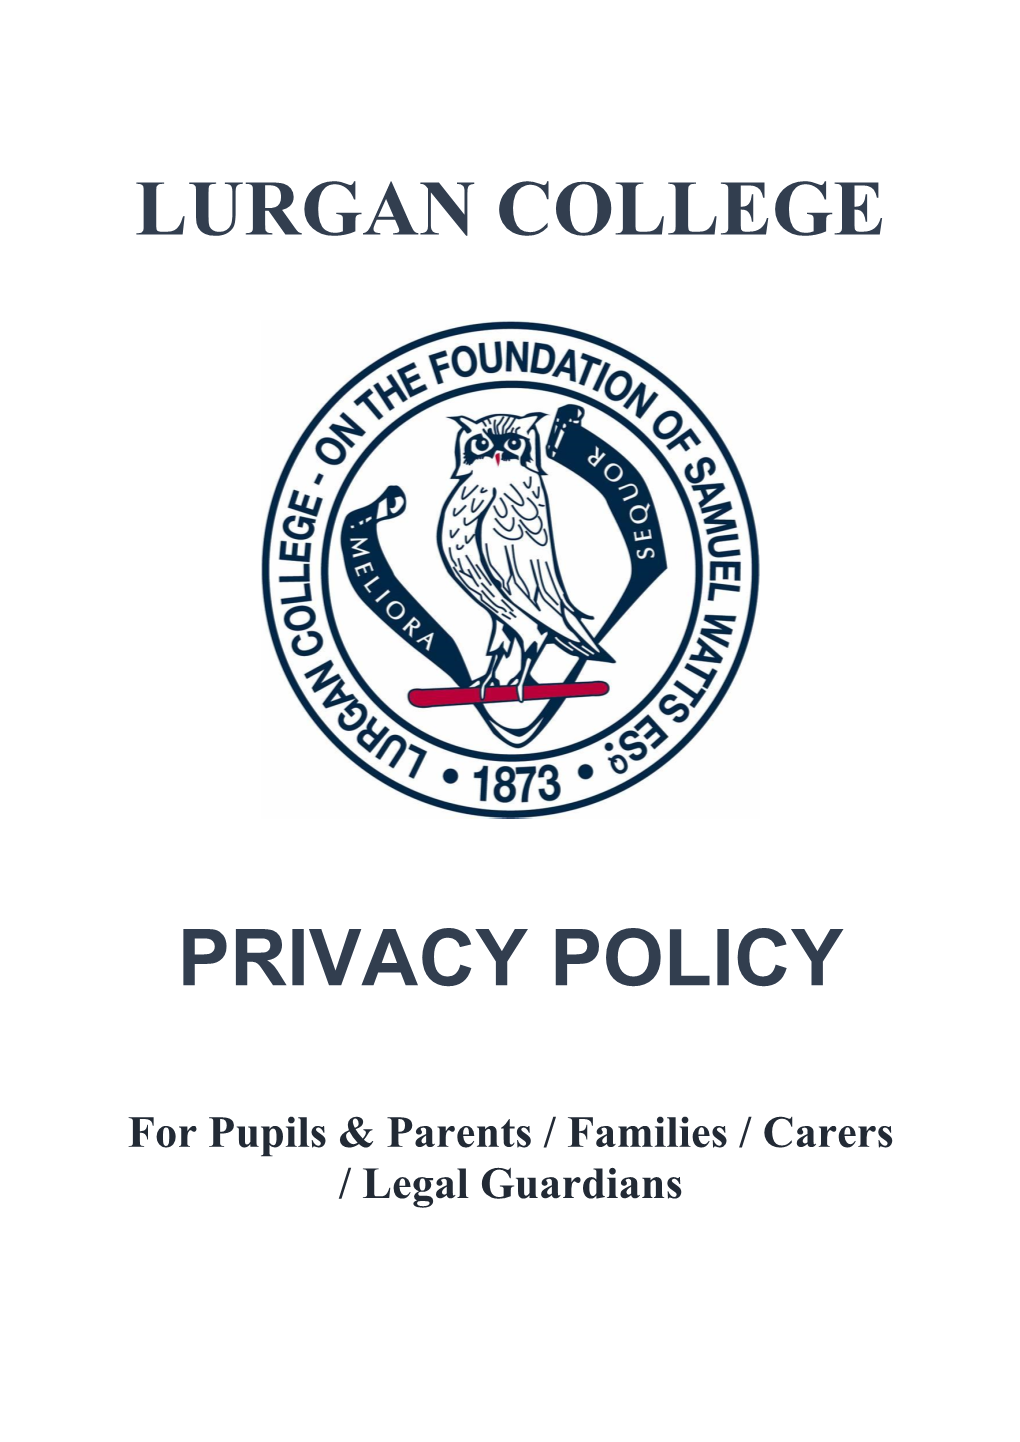 Lurgan College Privacy Policy